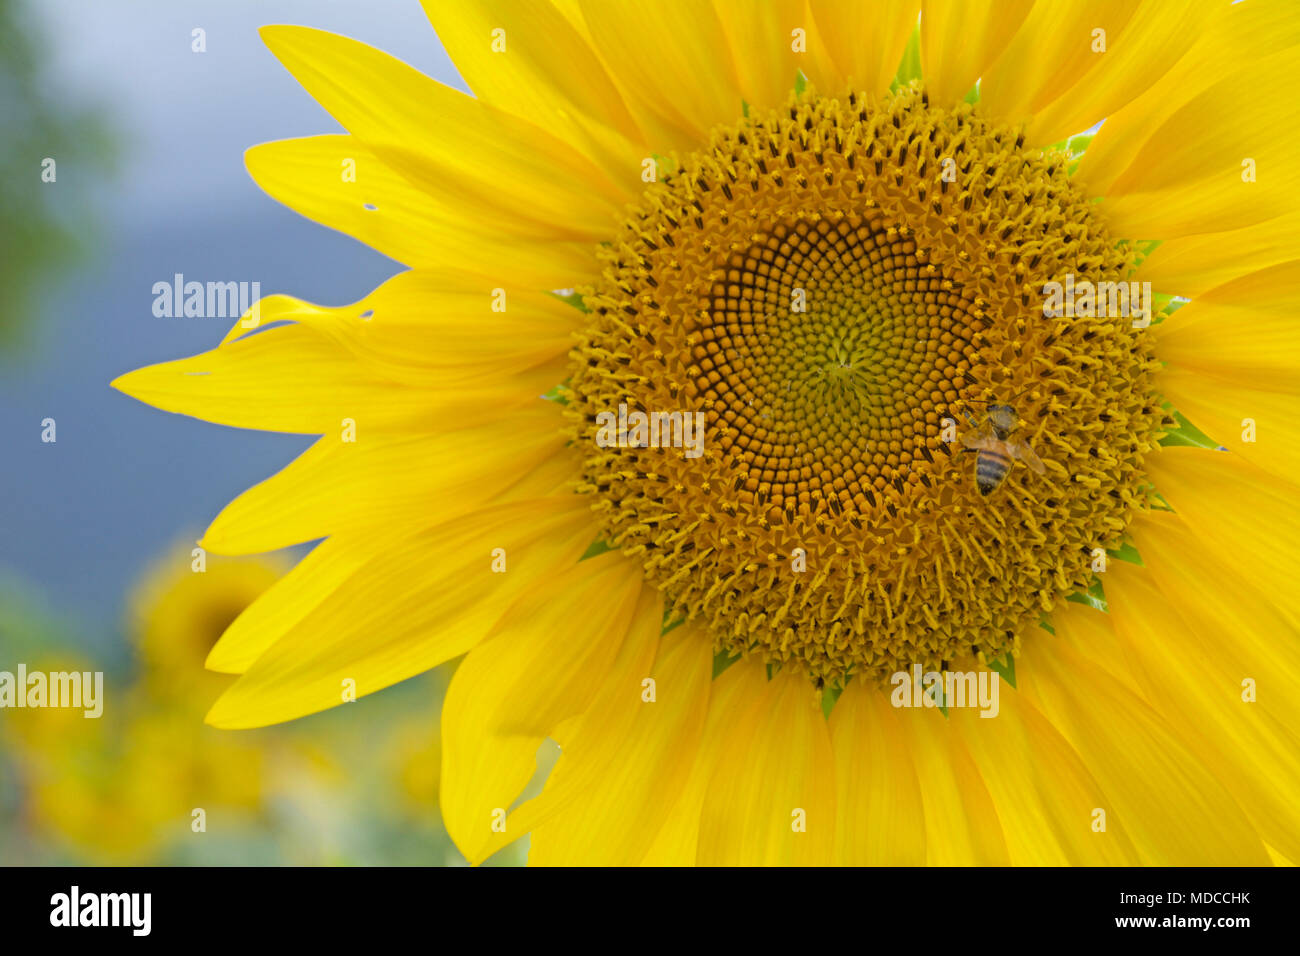 Bright Yellow sunflower head with bee collection pollen from around the stamens and petals Stock Photo